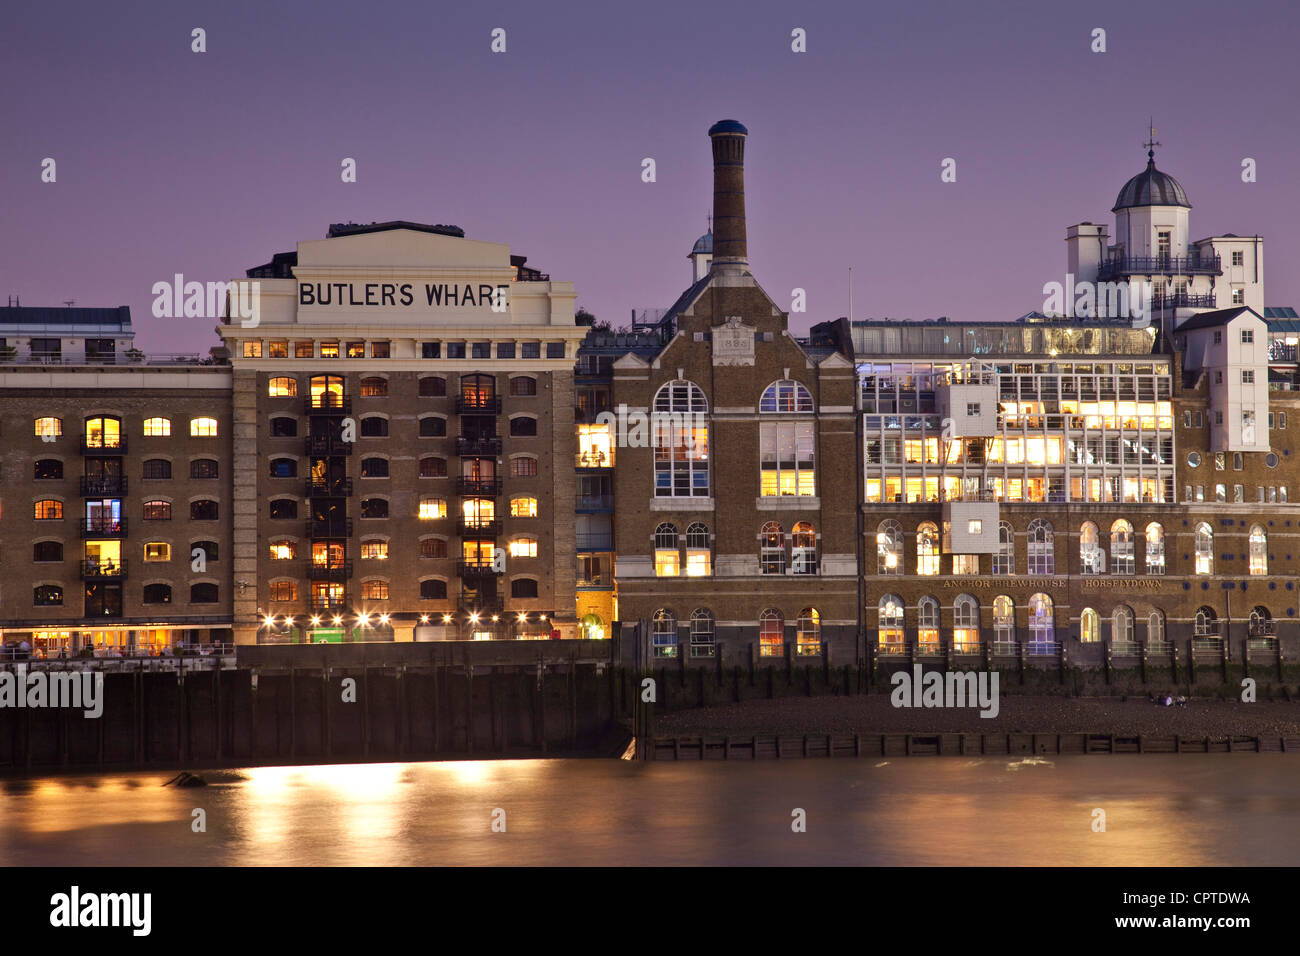 Butler's Wharf and Riverside Apartments, London, England Stock Photo - Alamy